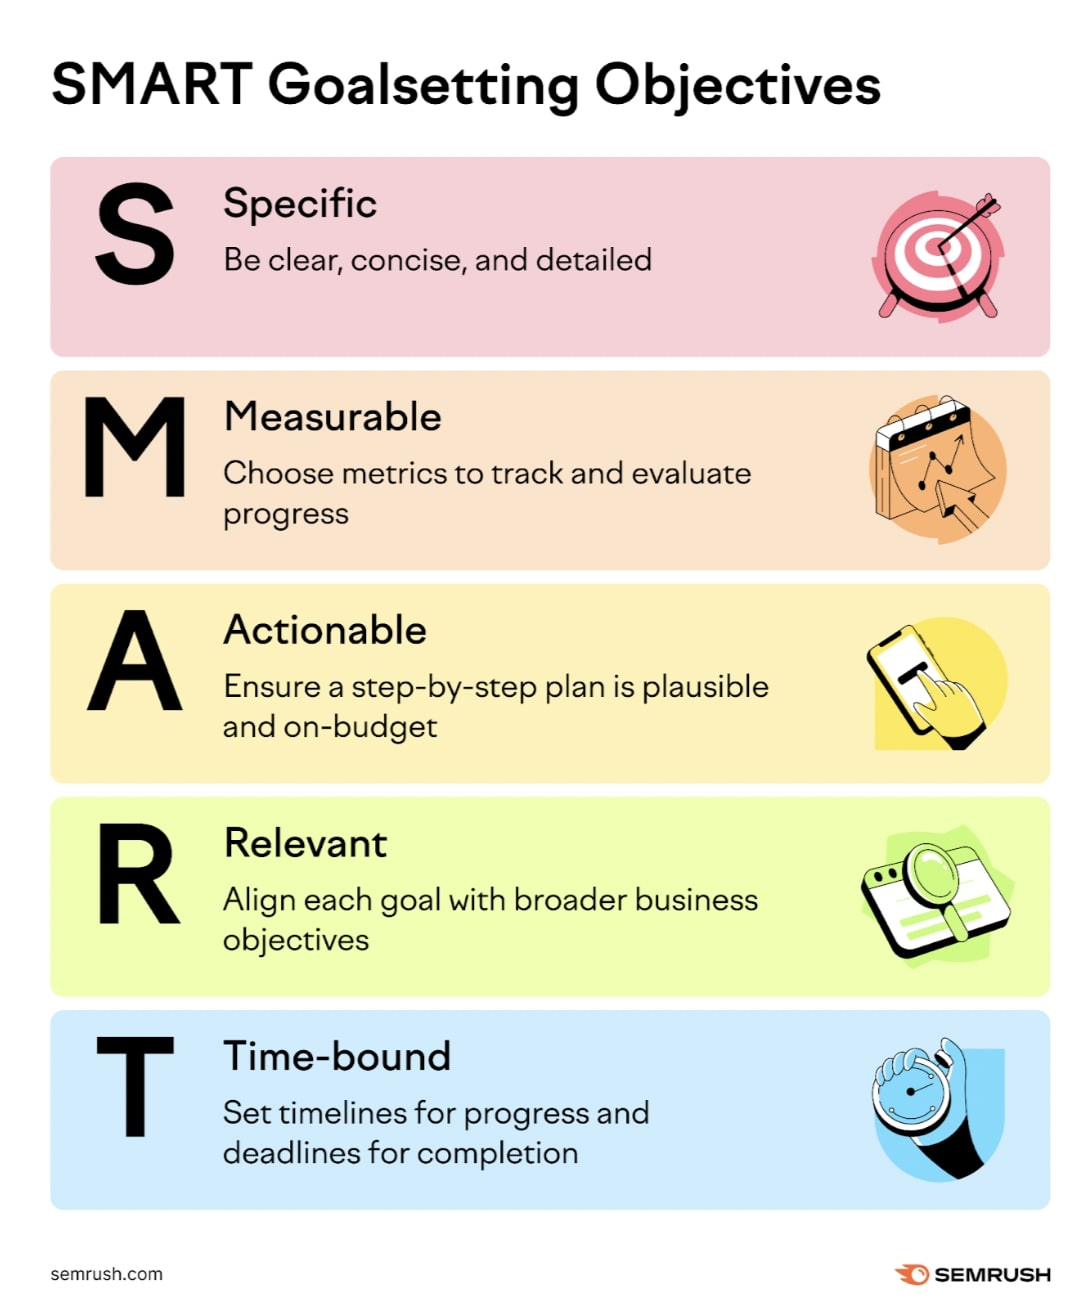 SMART (Specific, Measurable, Actionable, Relevant, Time-bound) goal setting framework